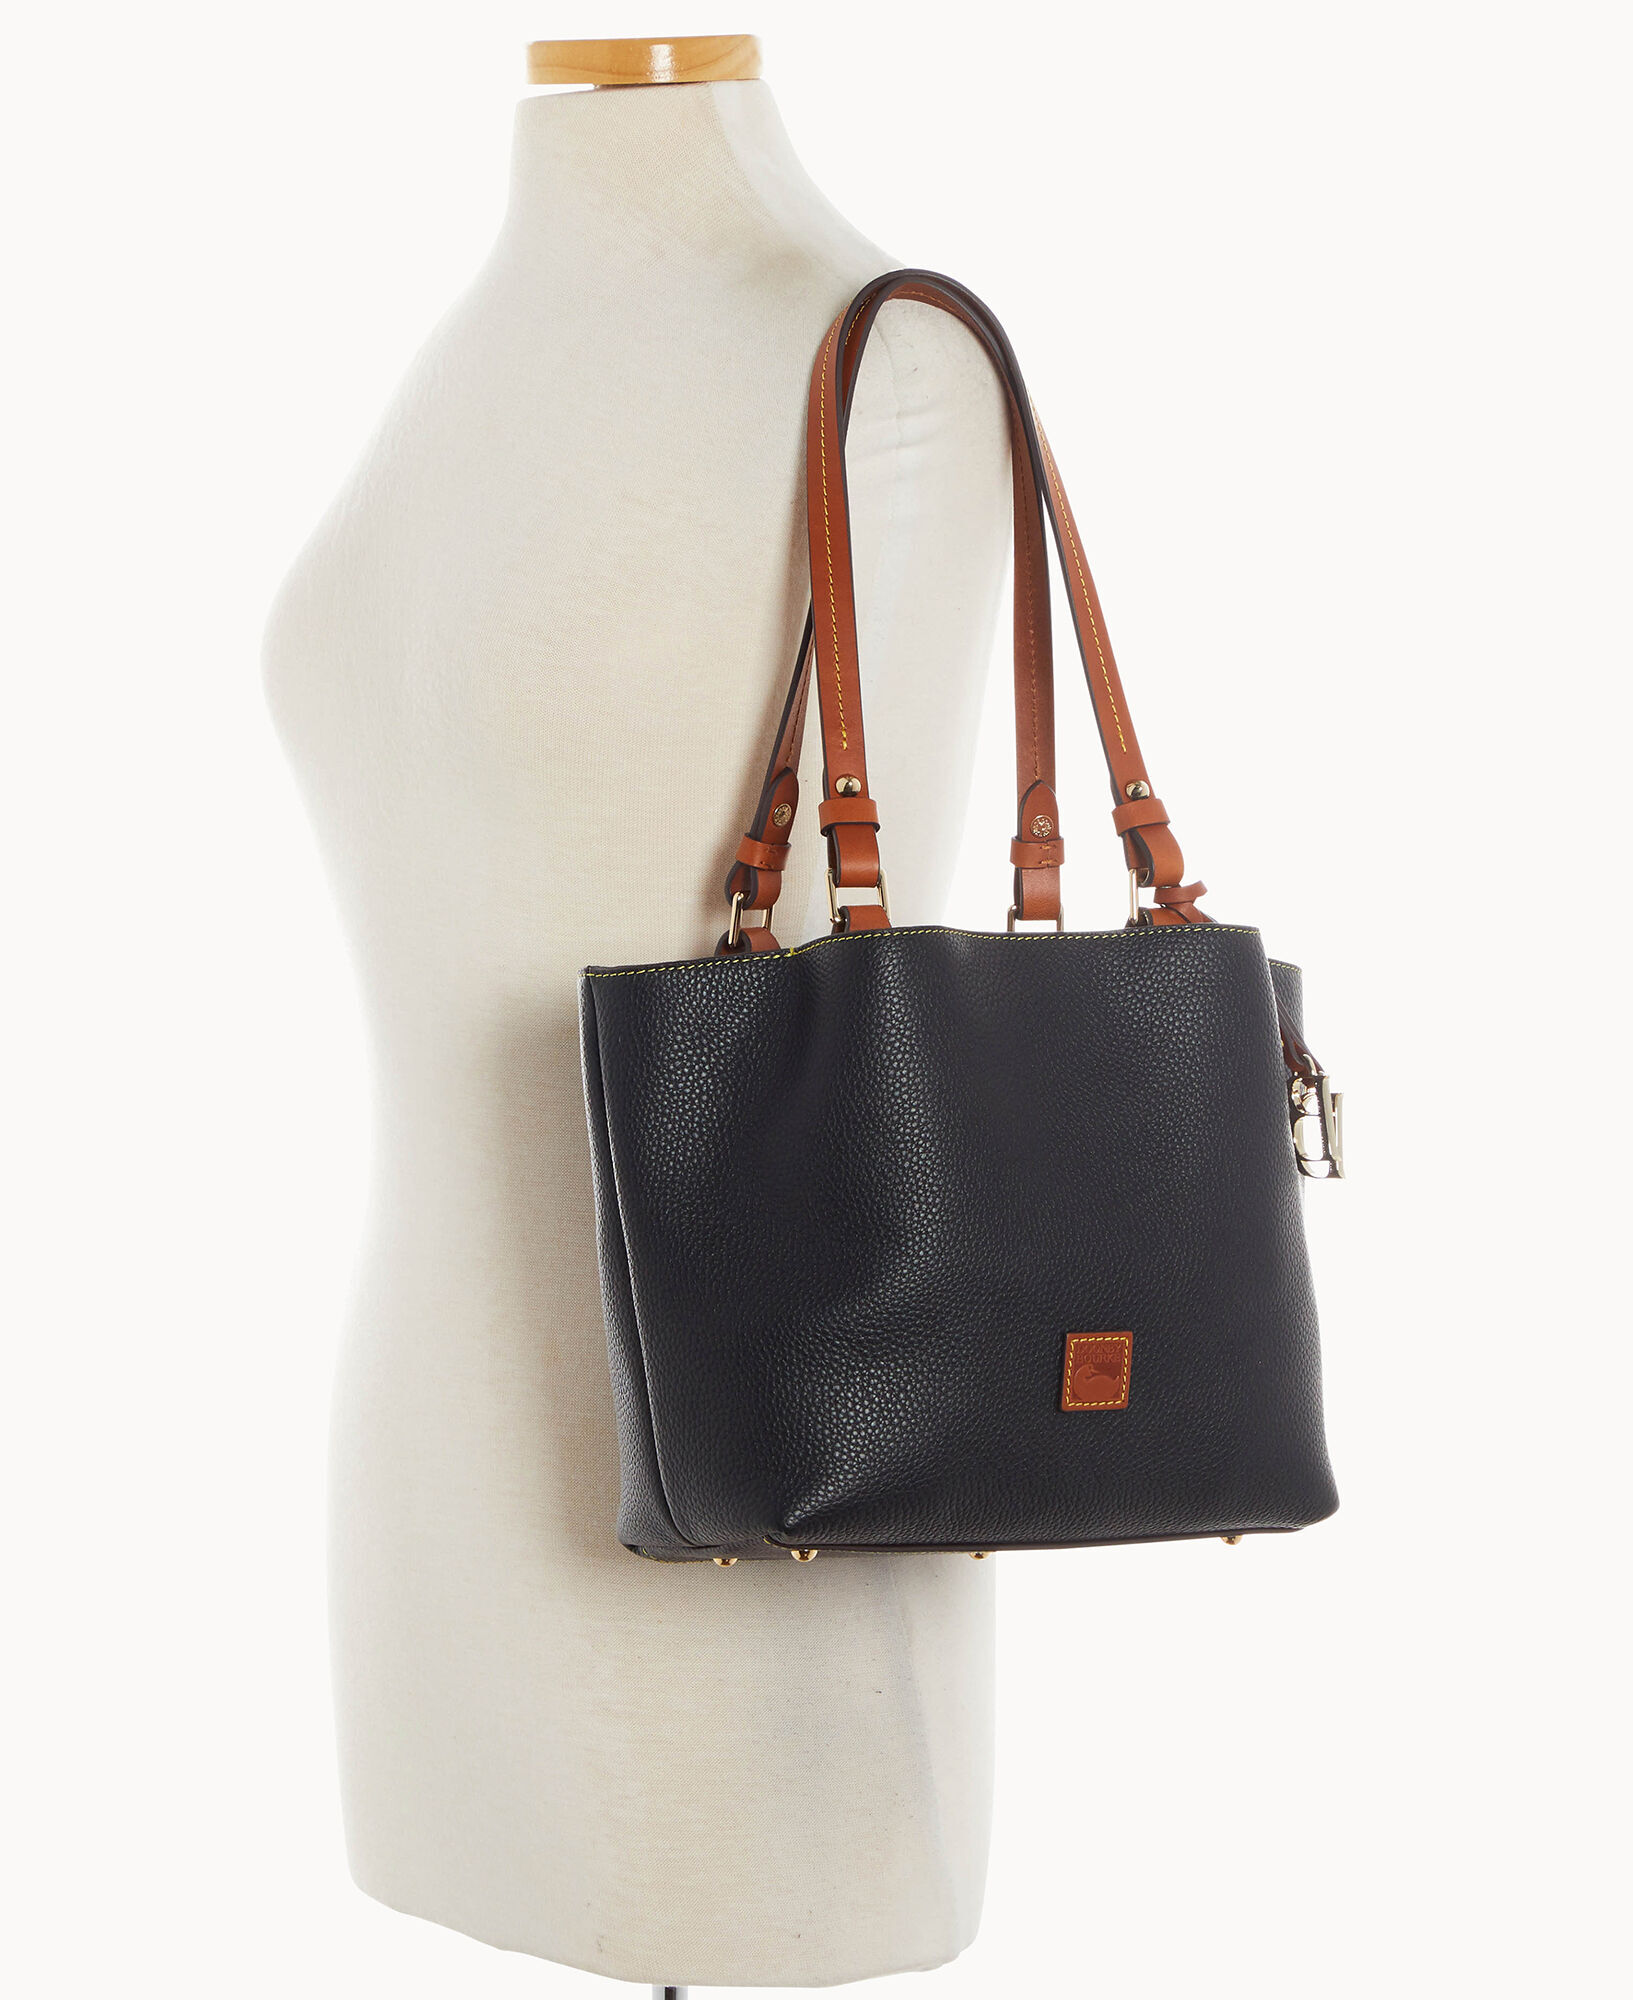 Dooney & Bourke Pebble Leather Small Tote 